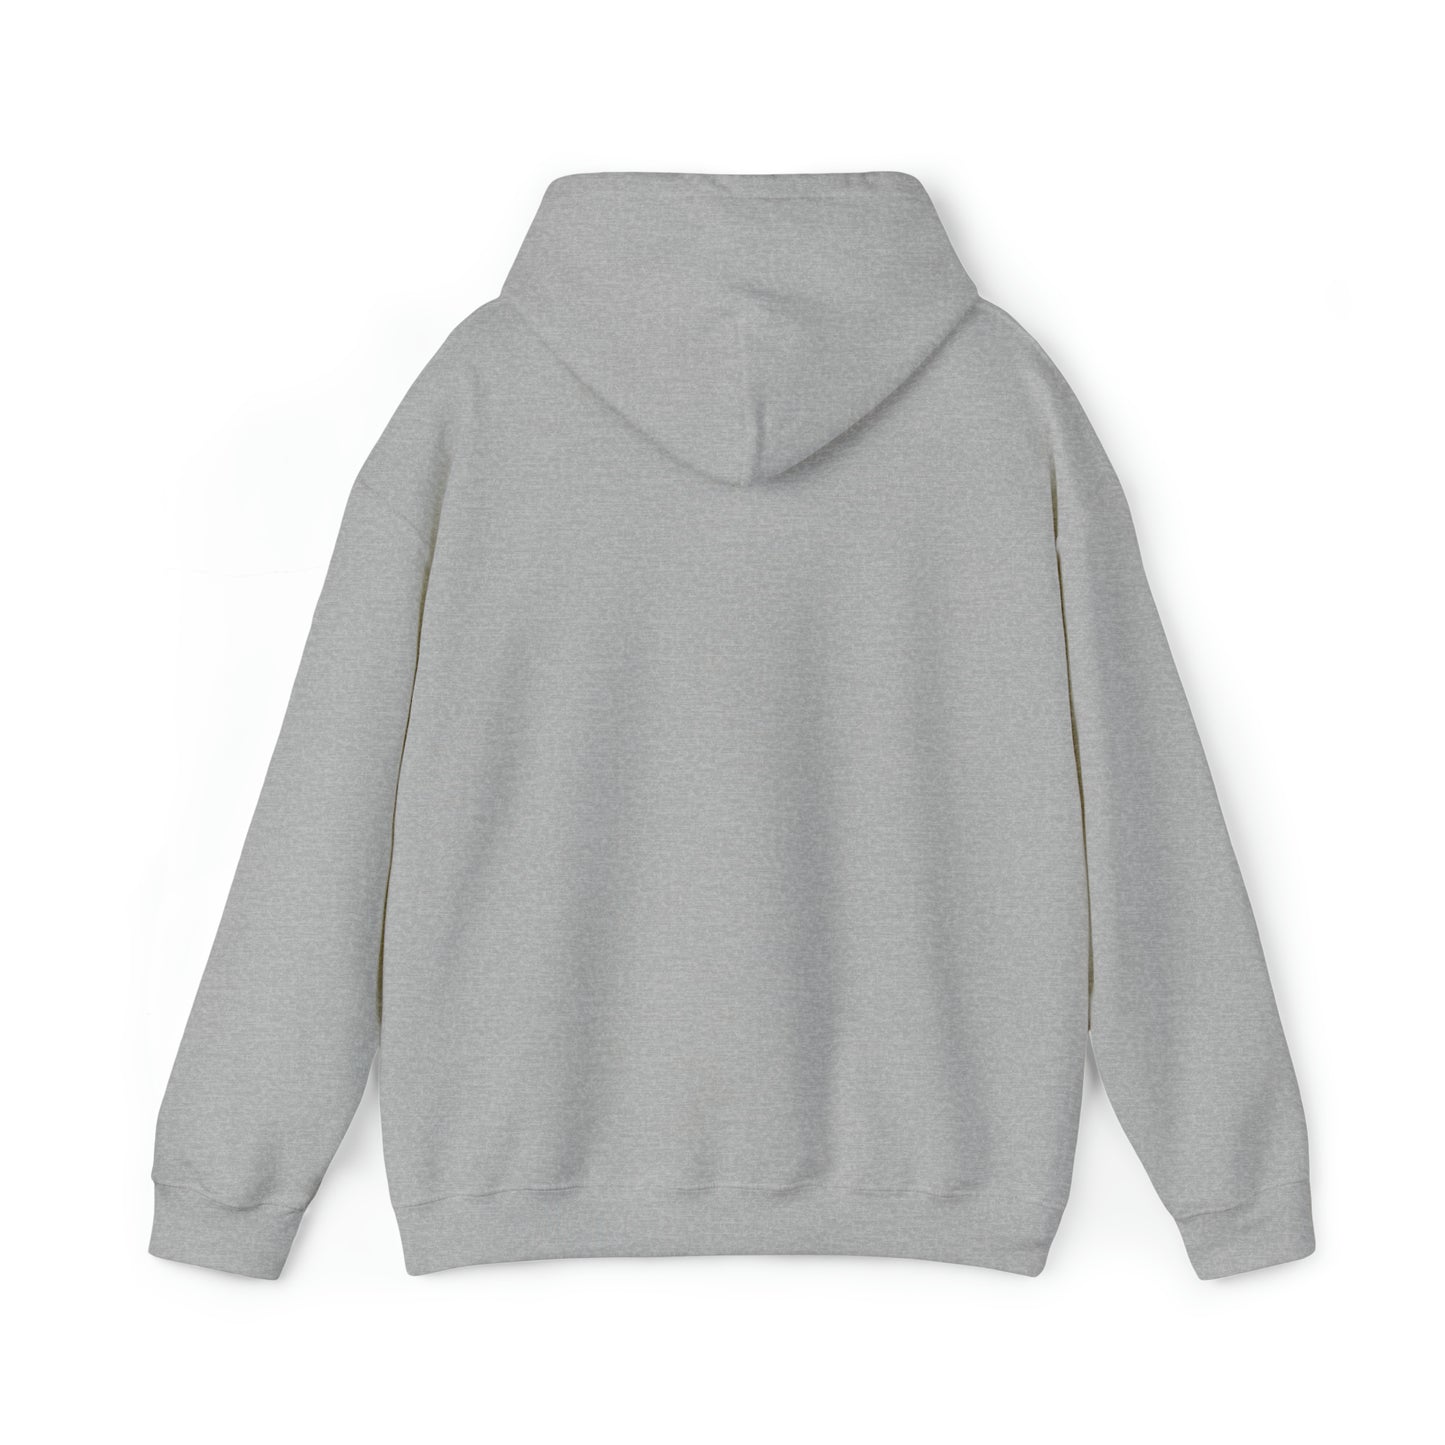 FYI not paying attention - Hooded Sweatshirt